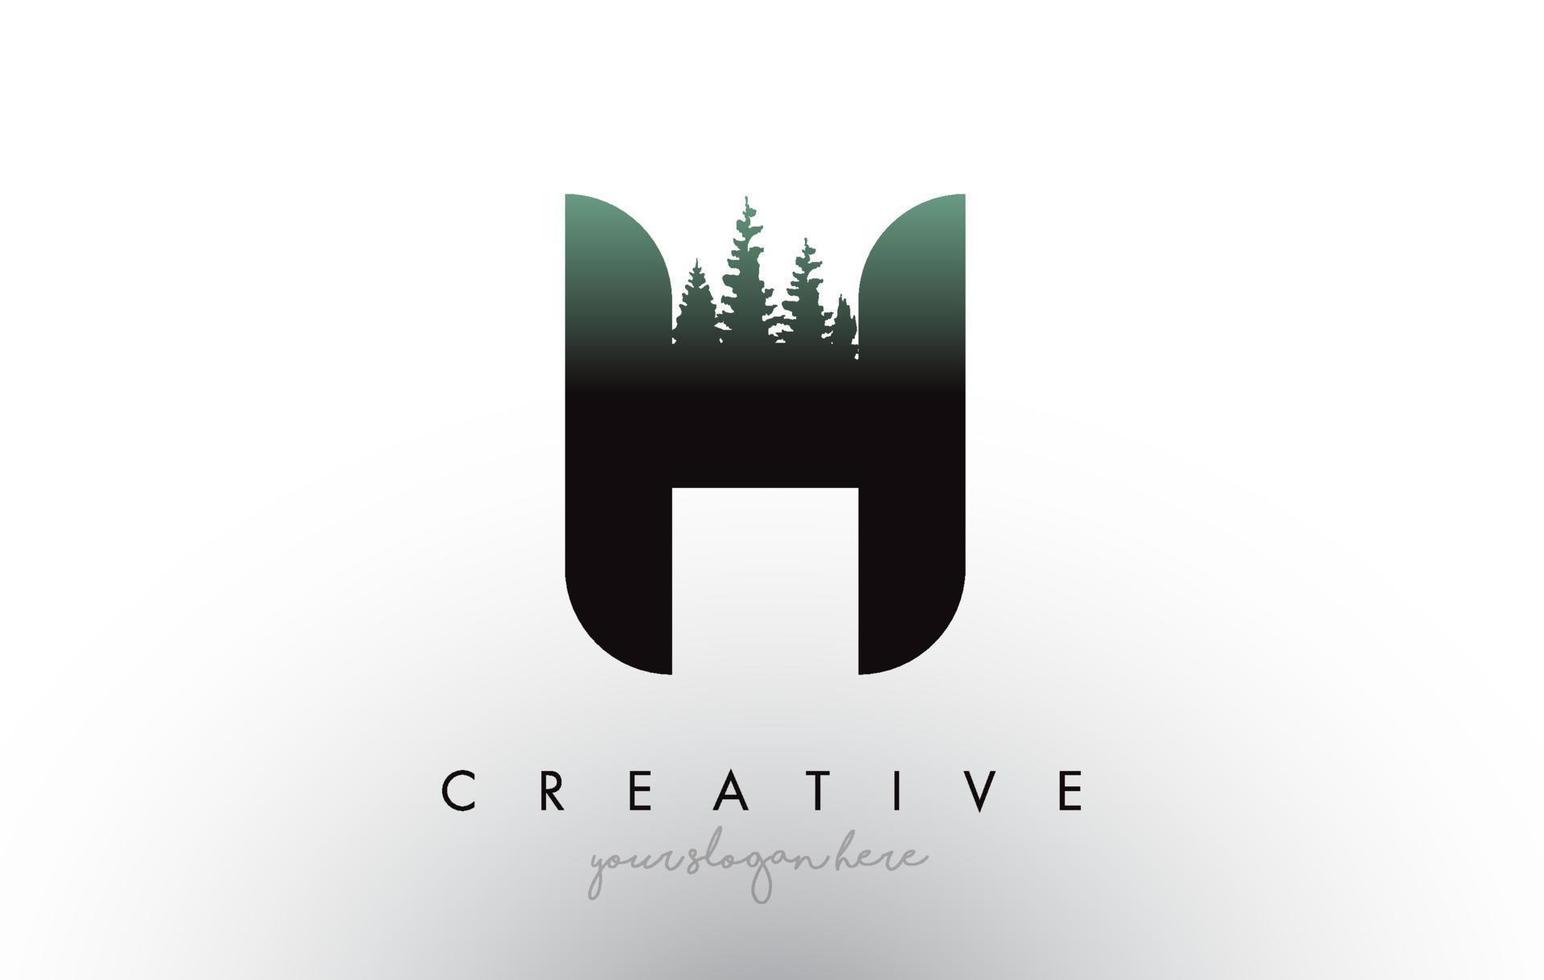 Creative H Letter Logo Idea With Pine Forest Trees. Letter H Design With Pine Tree on Top vector